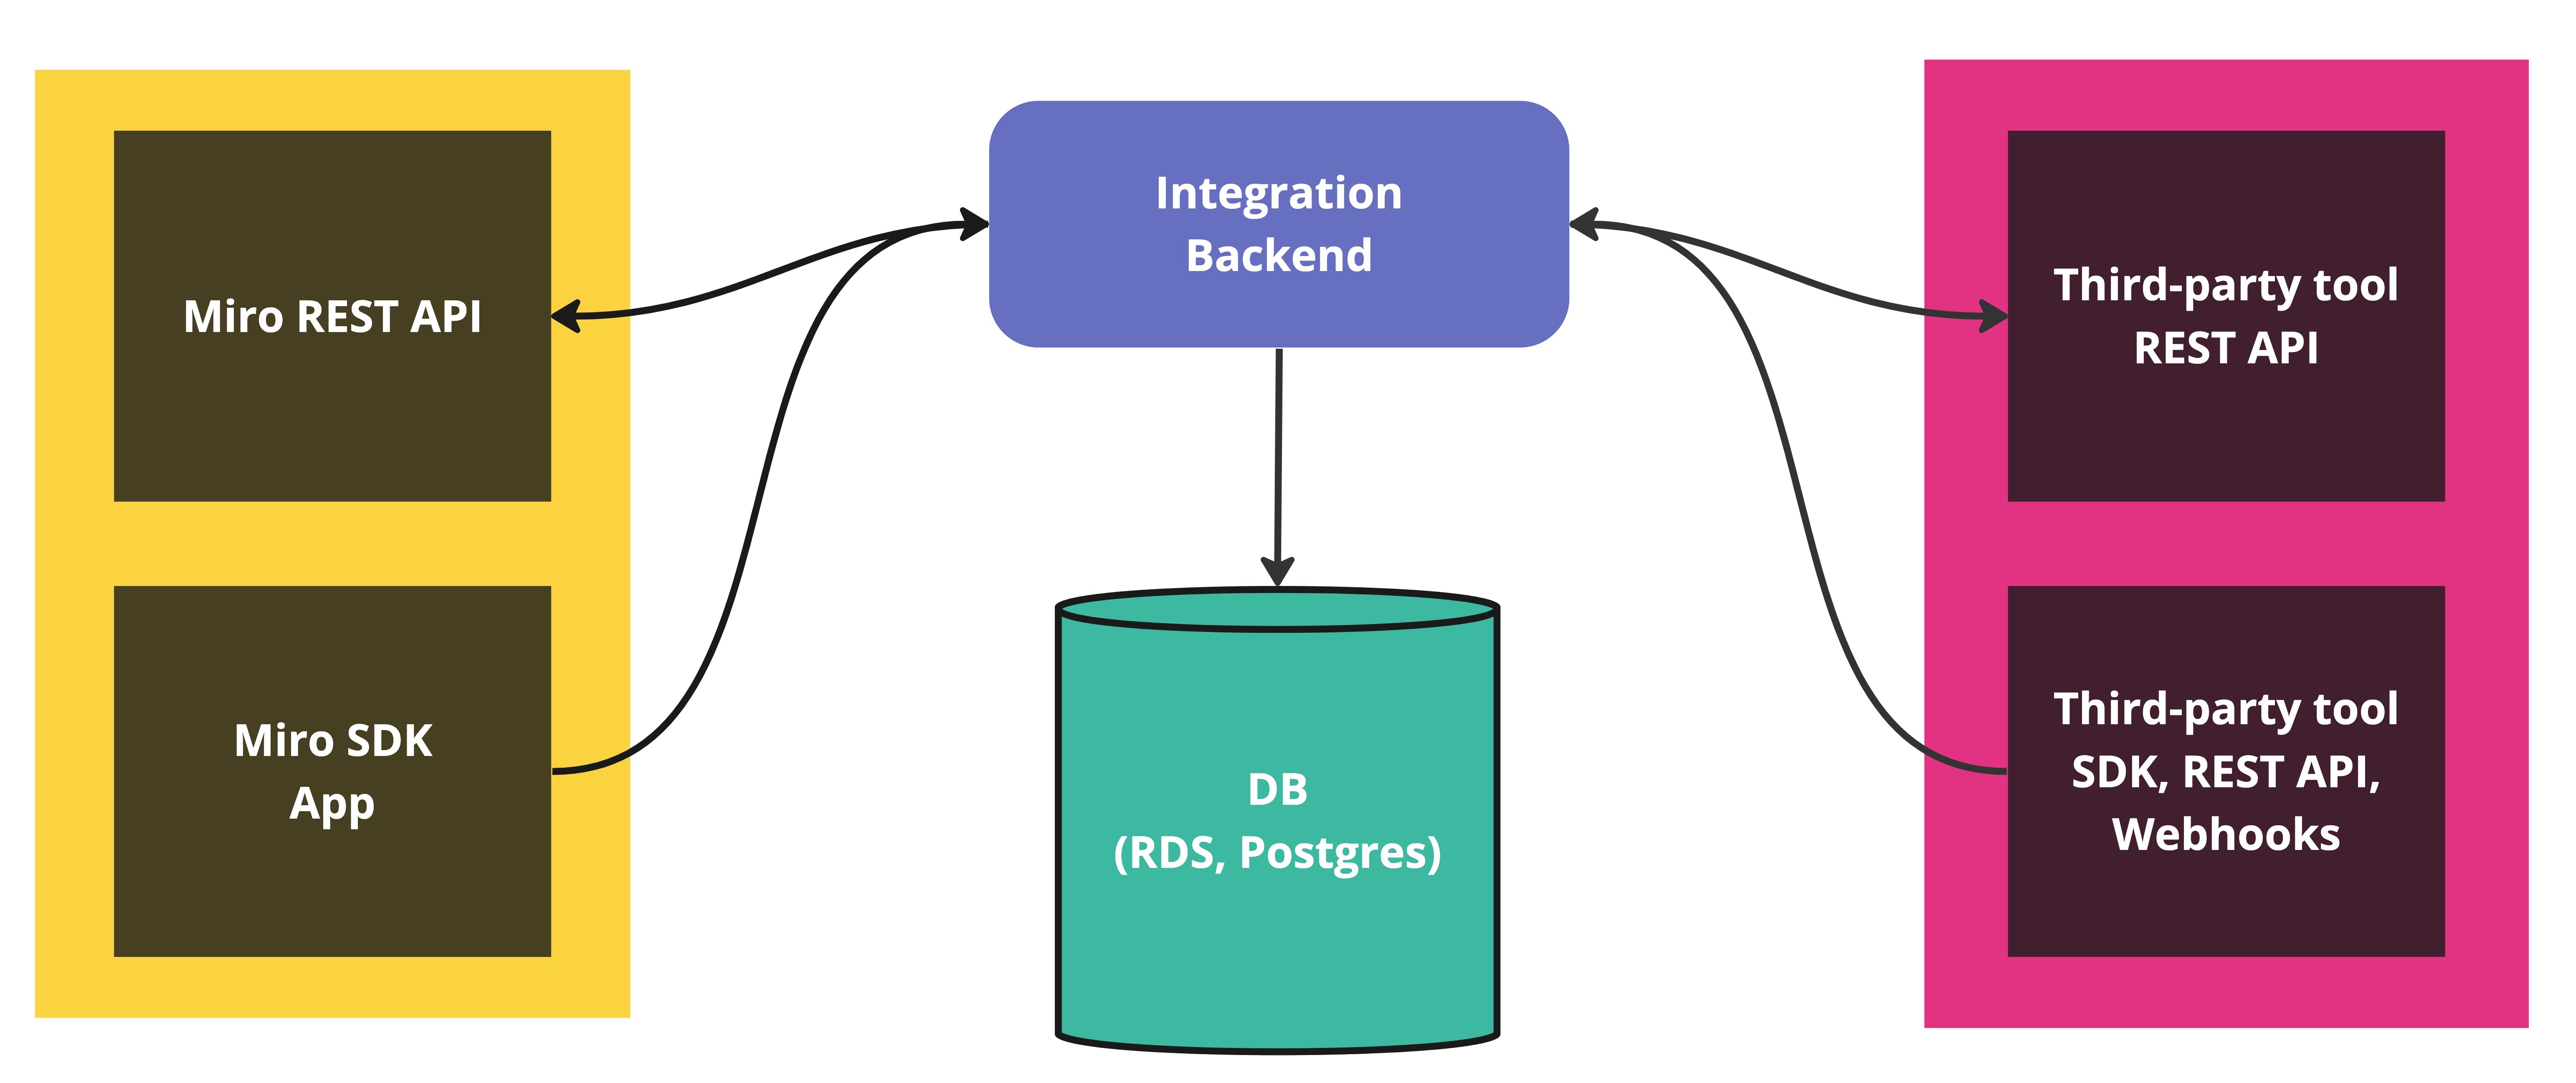 Figure 1. The minimum infrastructure required for app card and third-party tool integration.